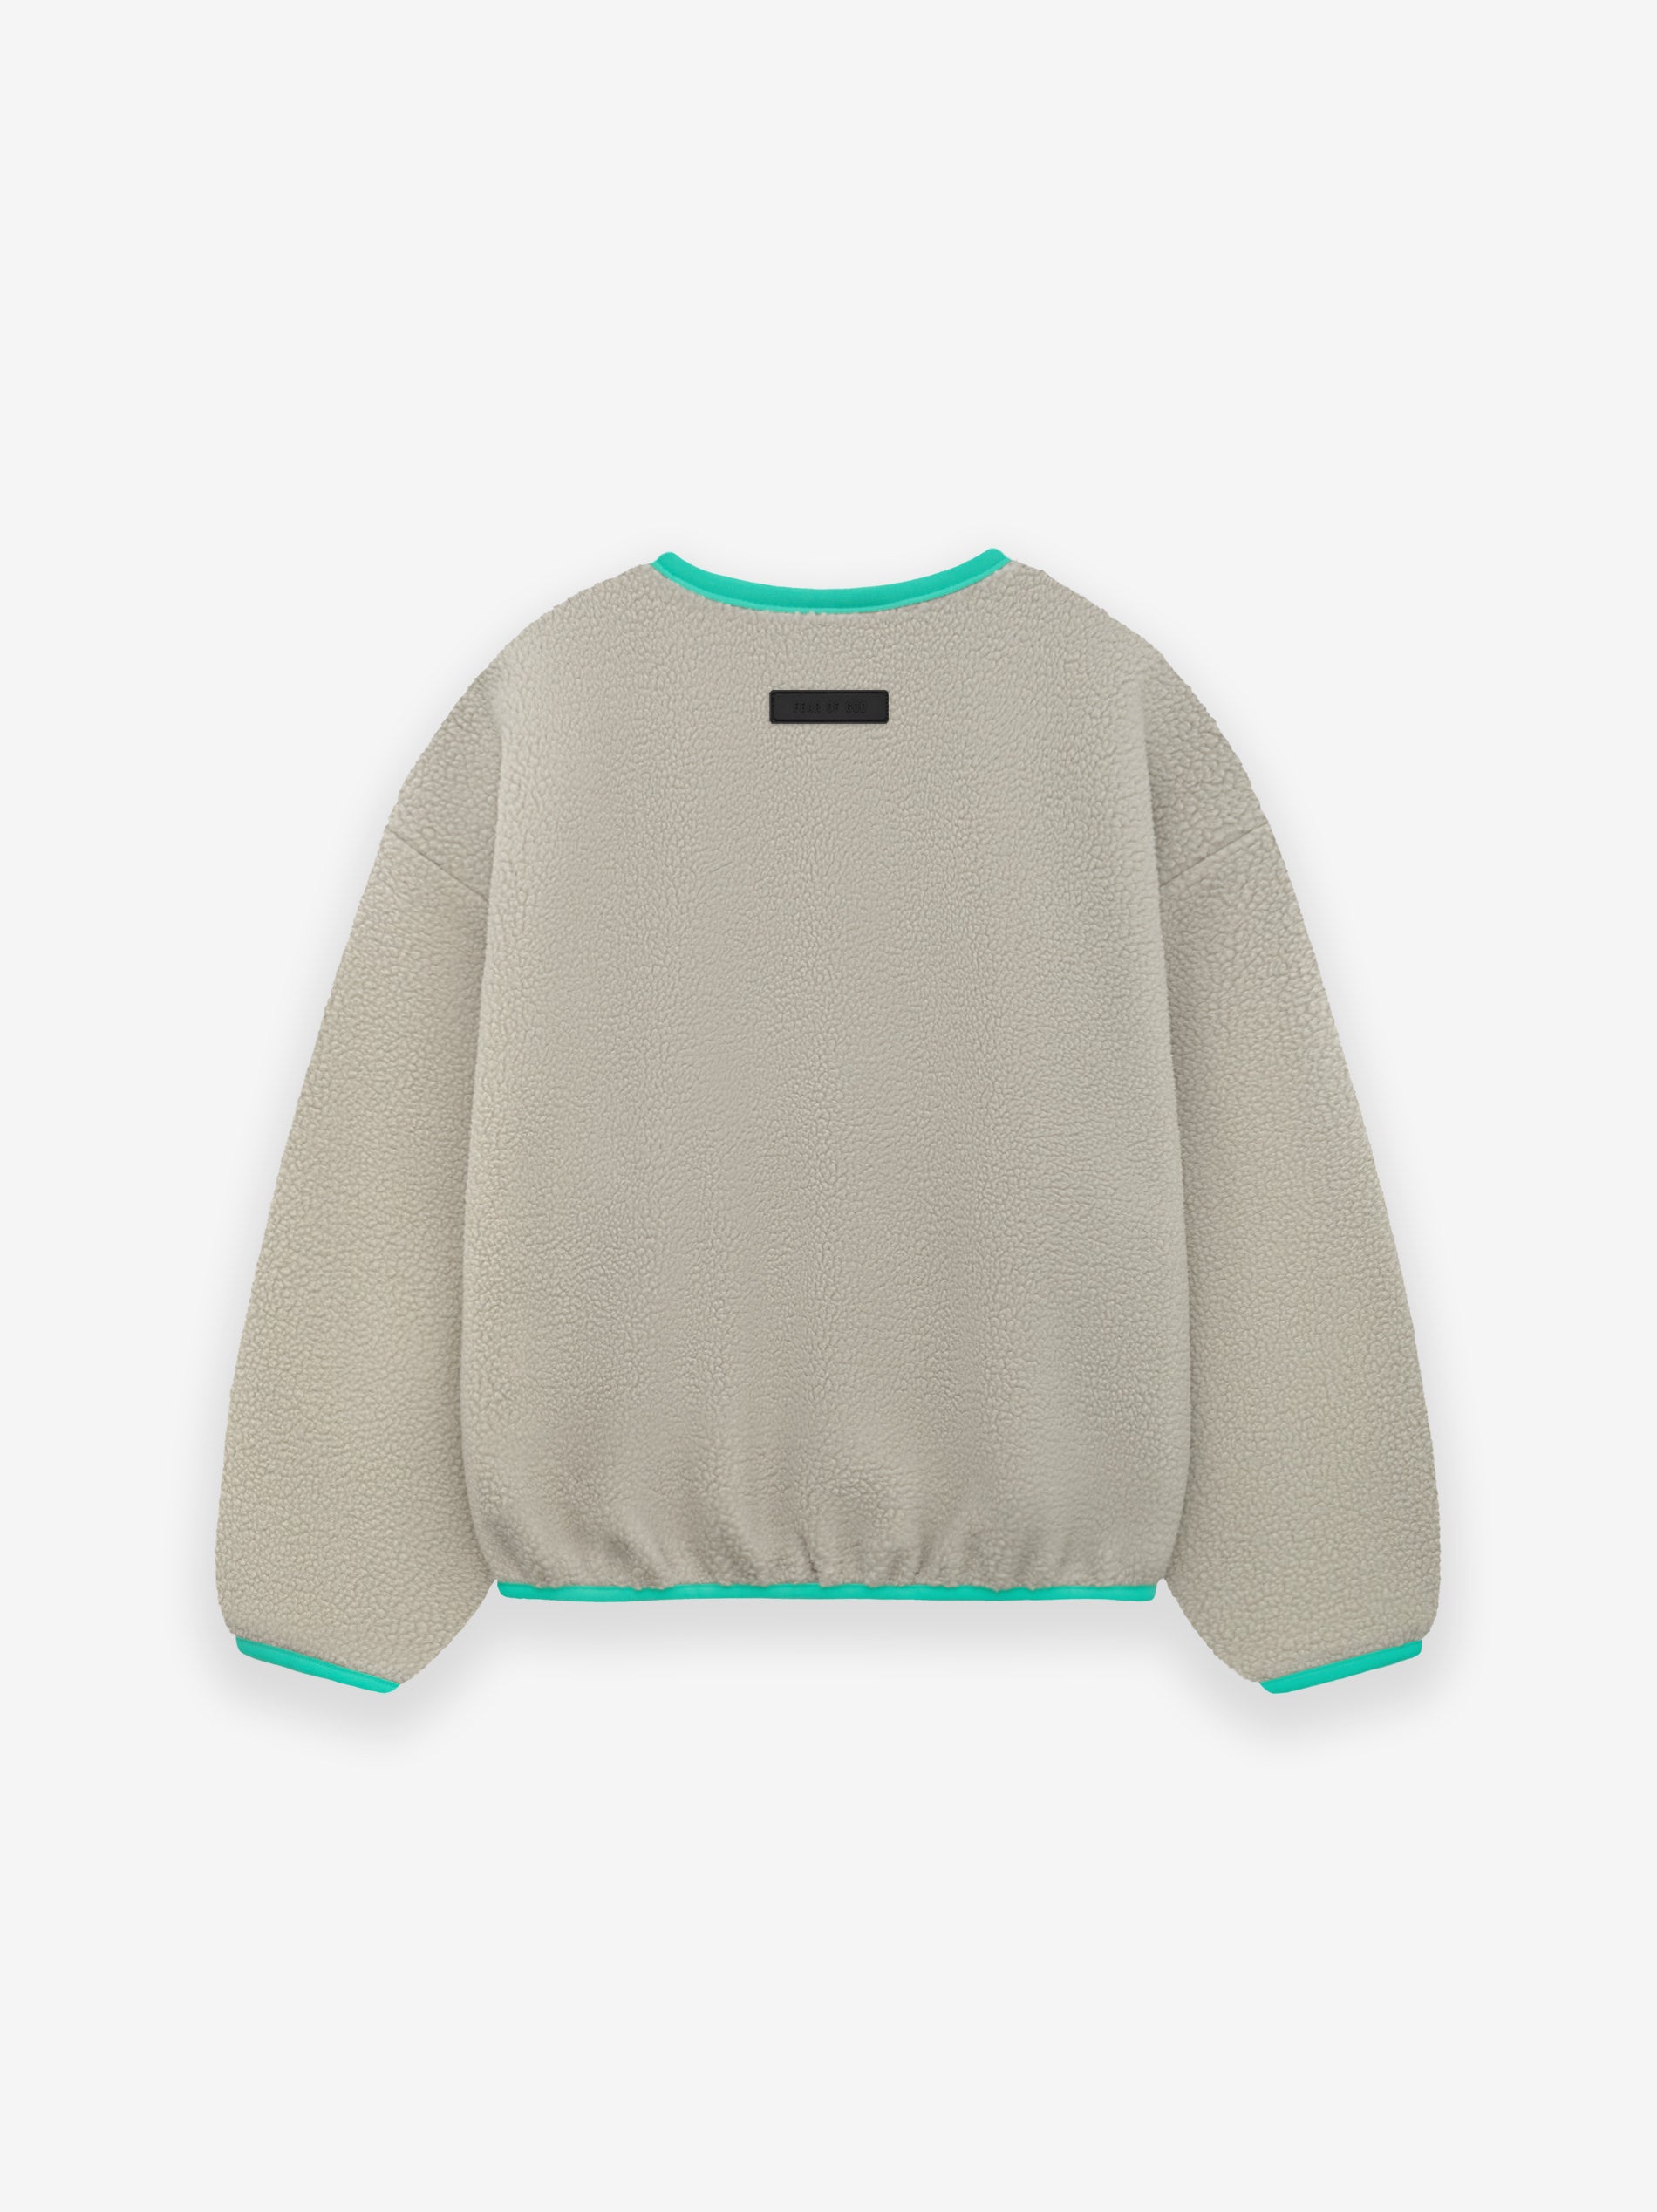 ESSENTIALS Kids Crewneck Sweater in Seal | Fear of God